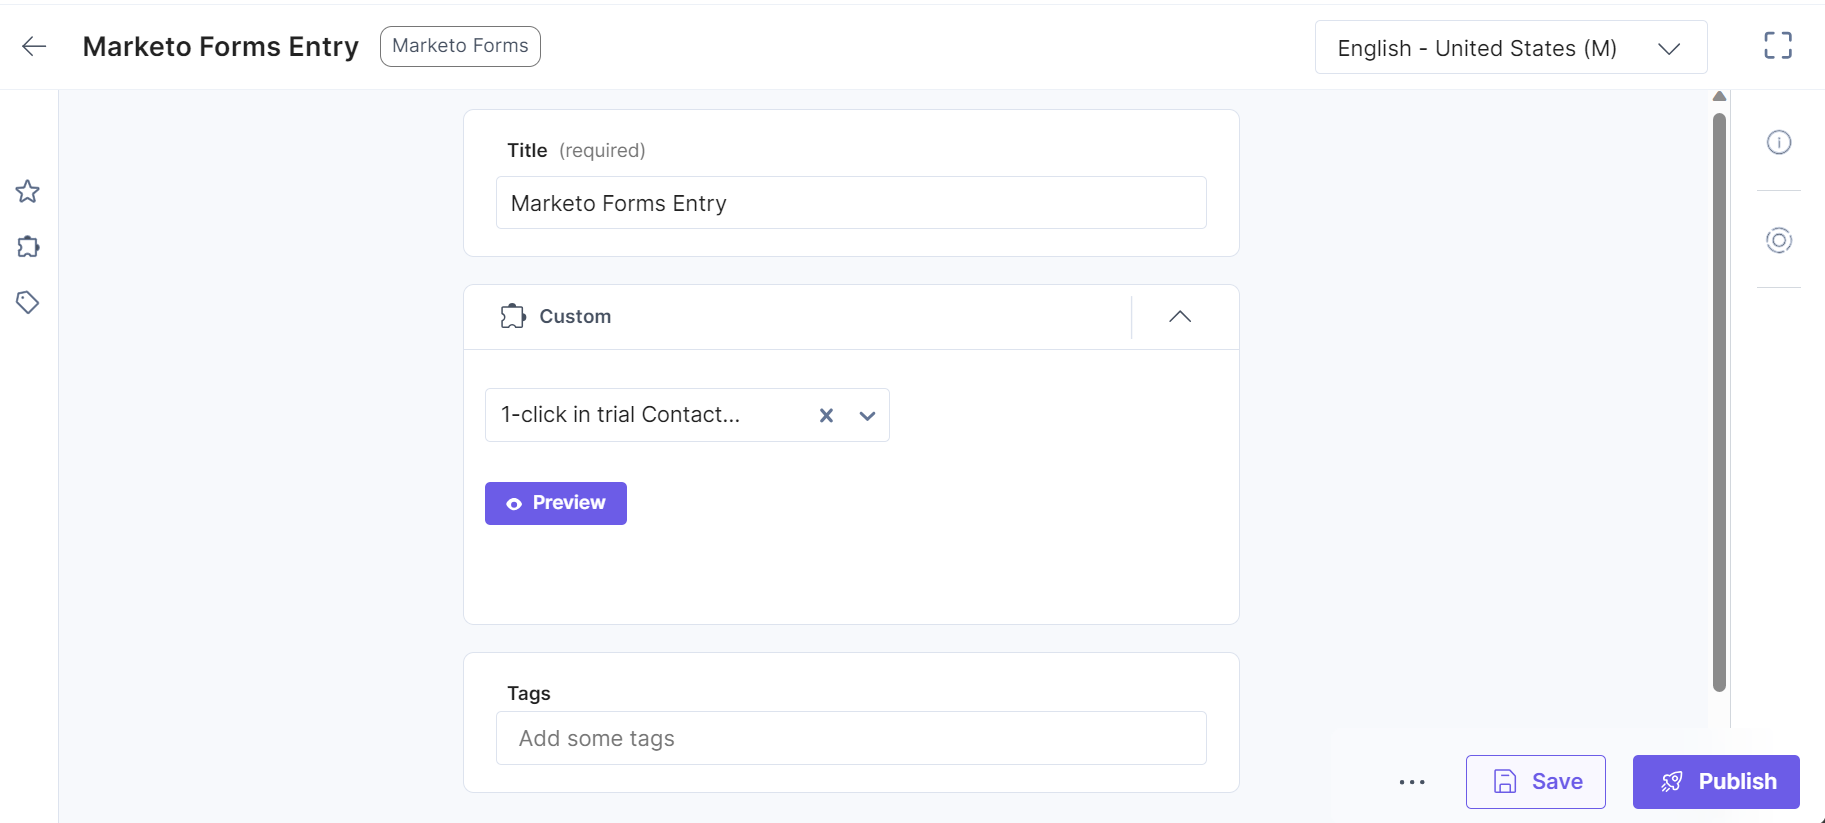 6_Marketo_Forms_Entry.png